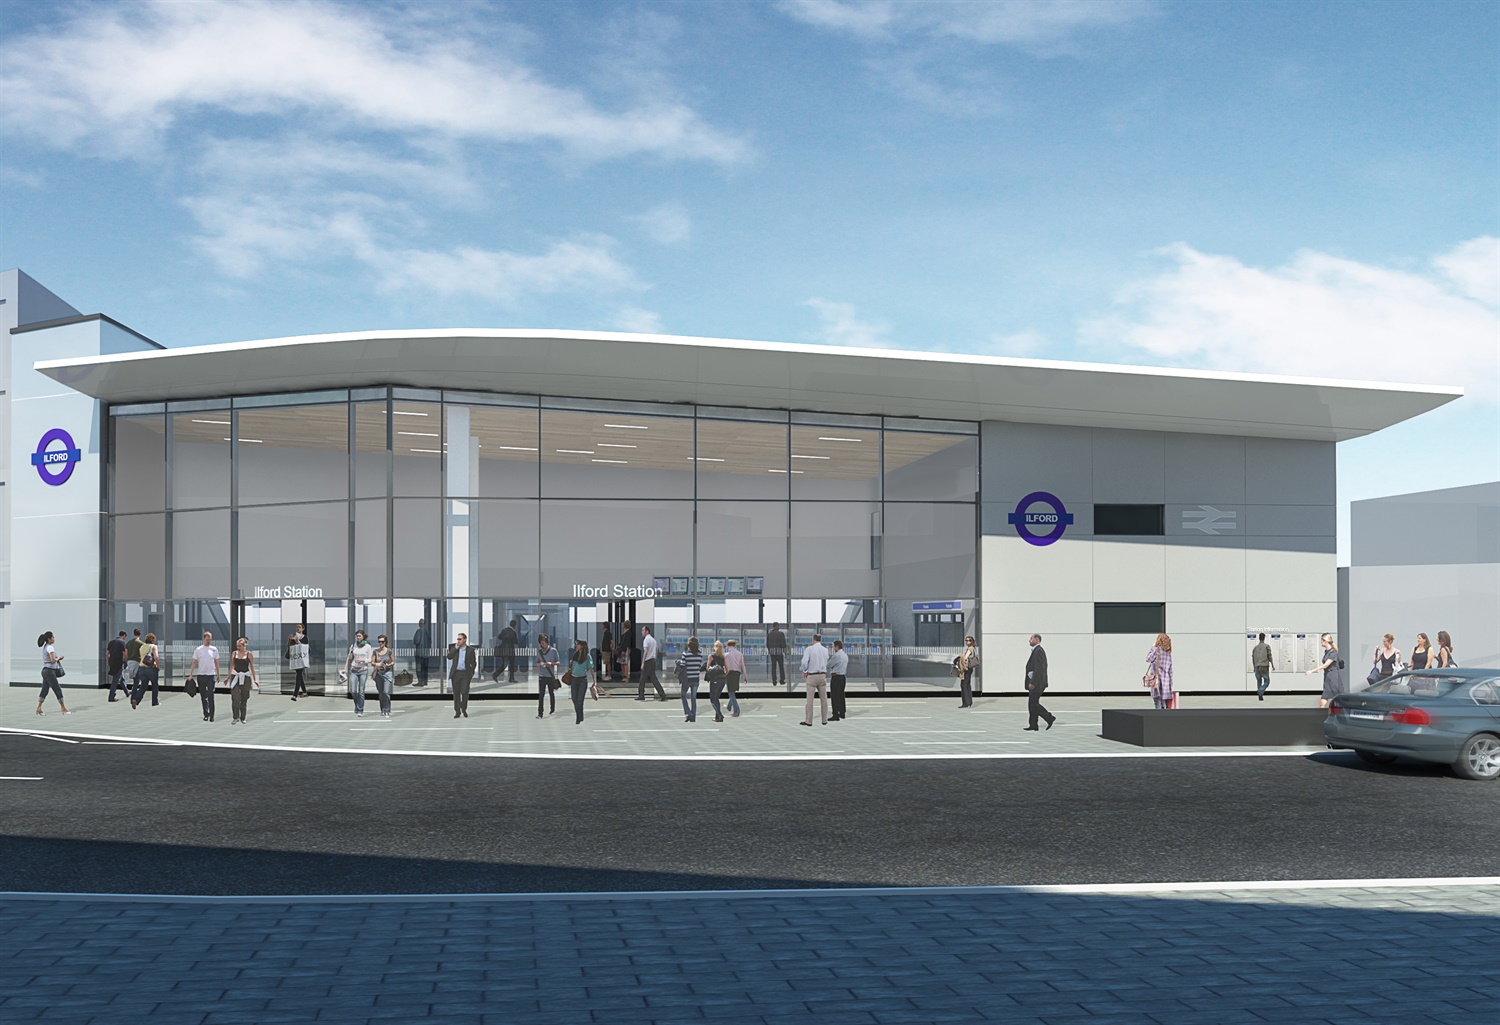 Proposals submitted for Crossrail upgrade of Ilford station